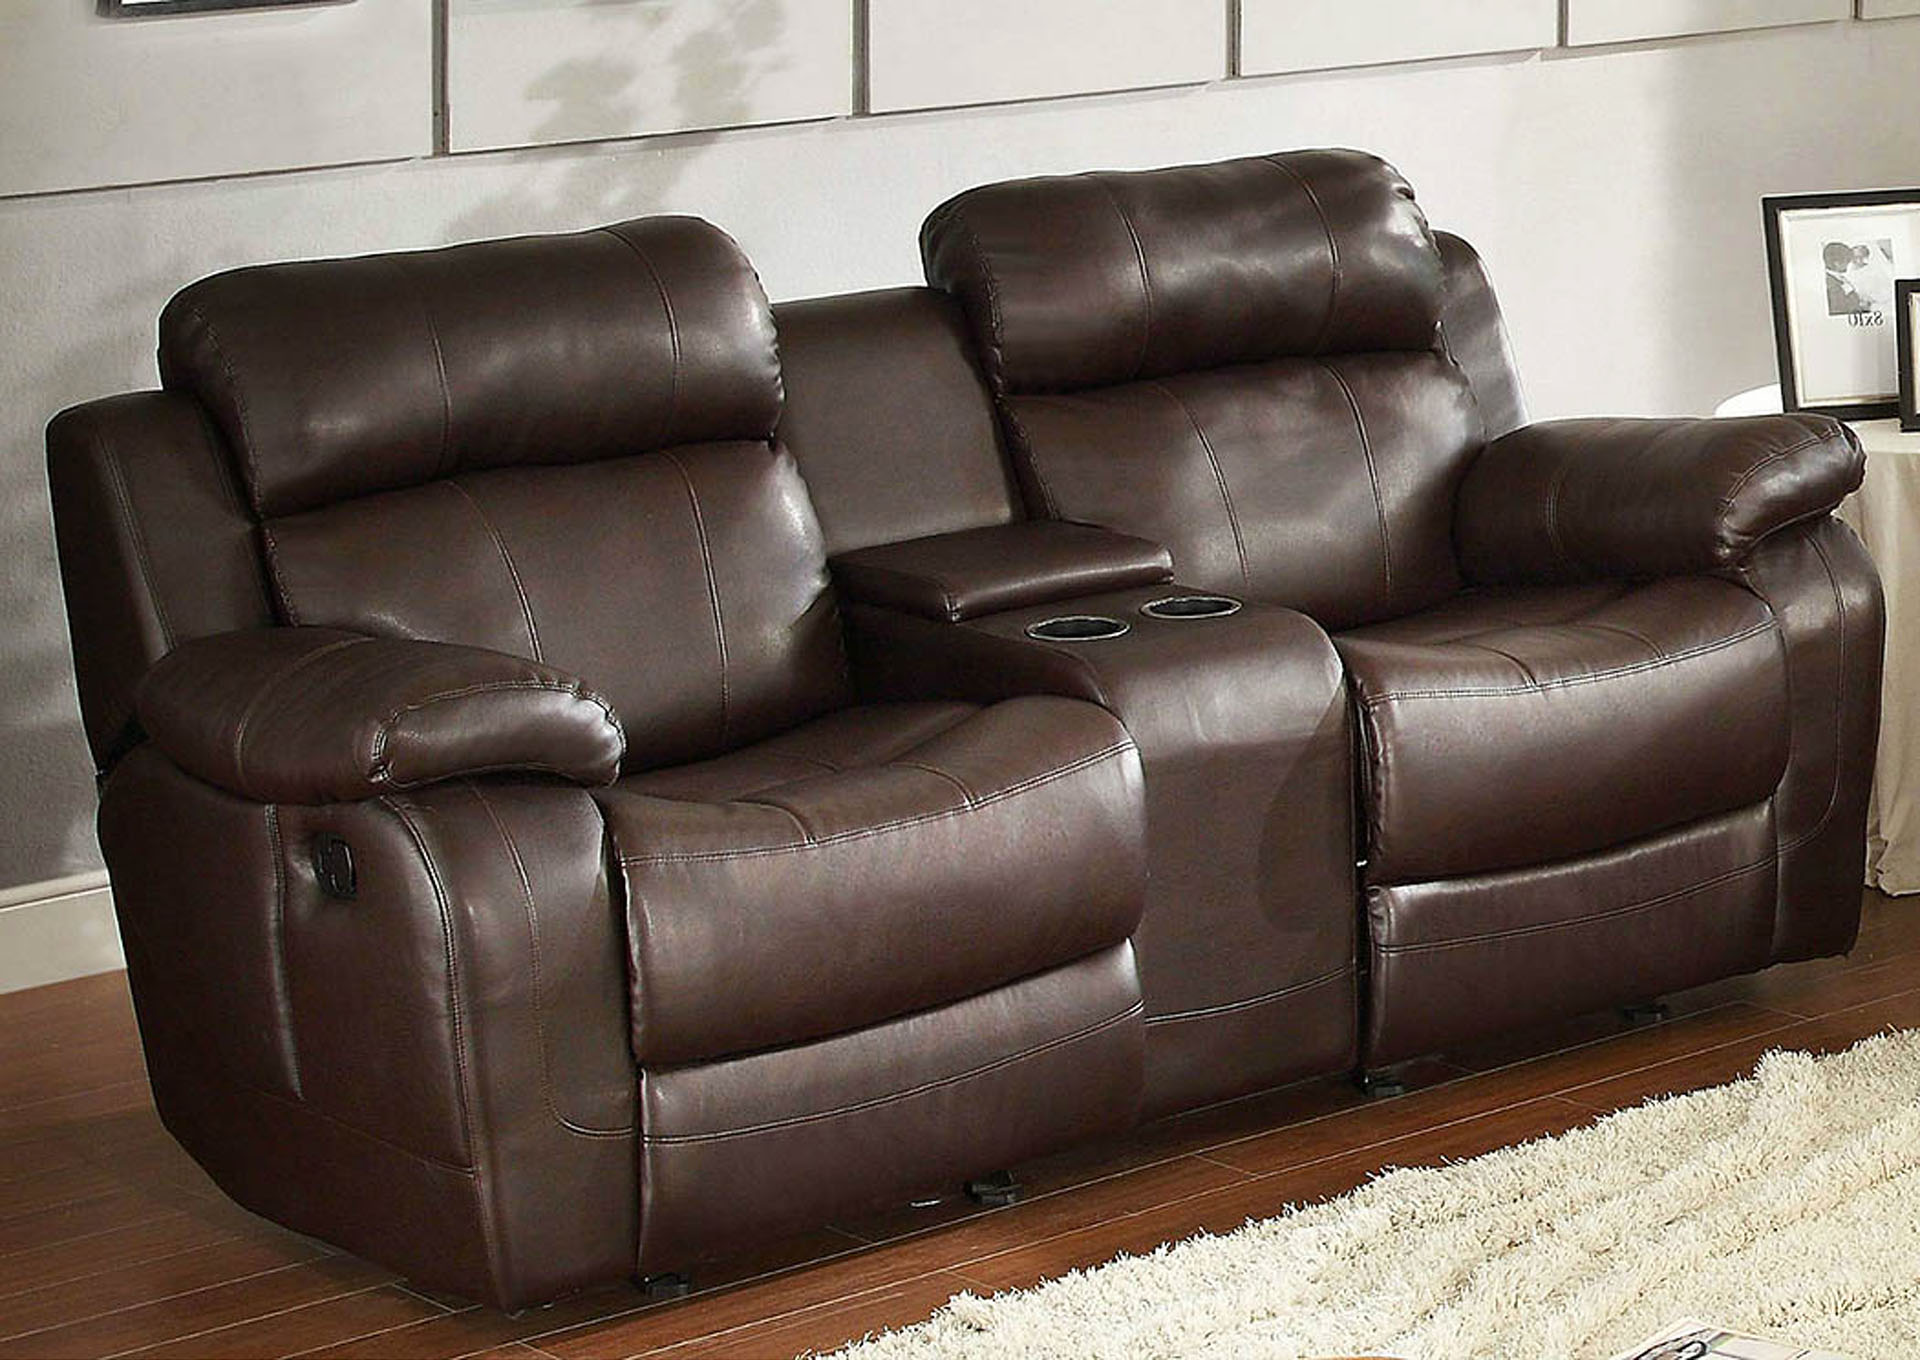 Mack S Furniture Warehouse Marille Brown Double Glider Reclining